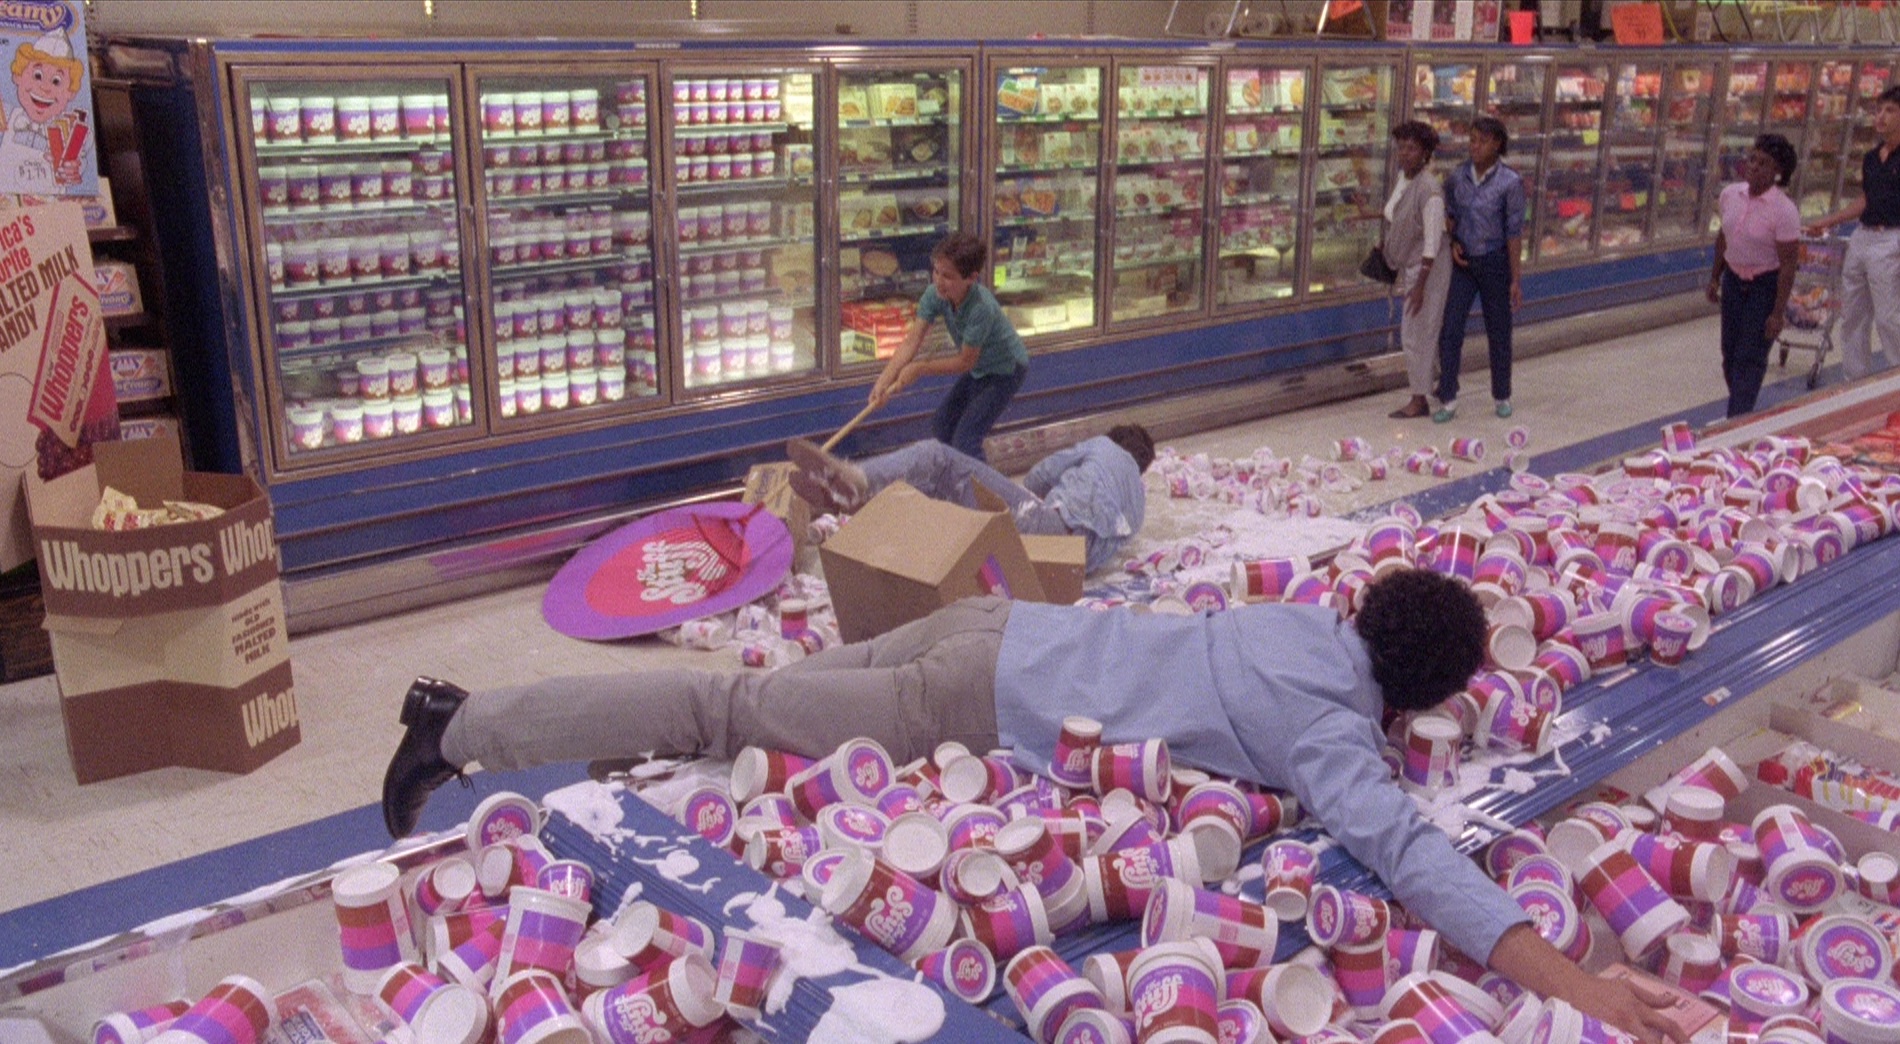 A still from The Stuff that shows the local grocery store overrun with the newest product - The Stuff. Tubs of the ice cream overtake the store as costumers jump and fall over to reach the product.